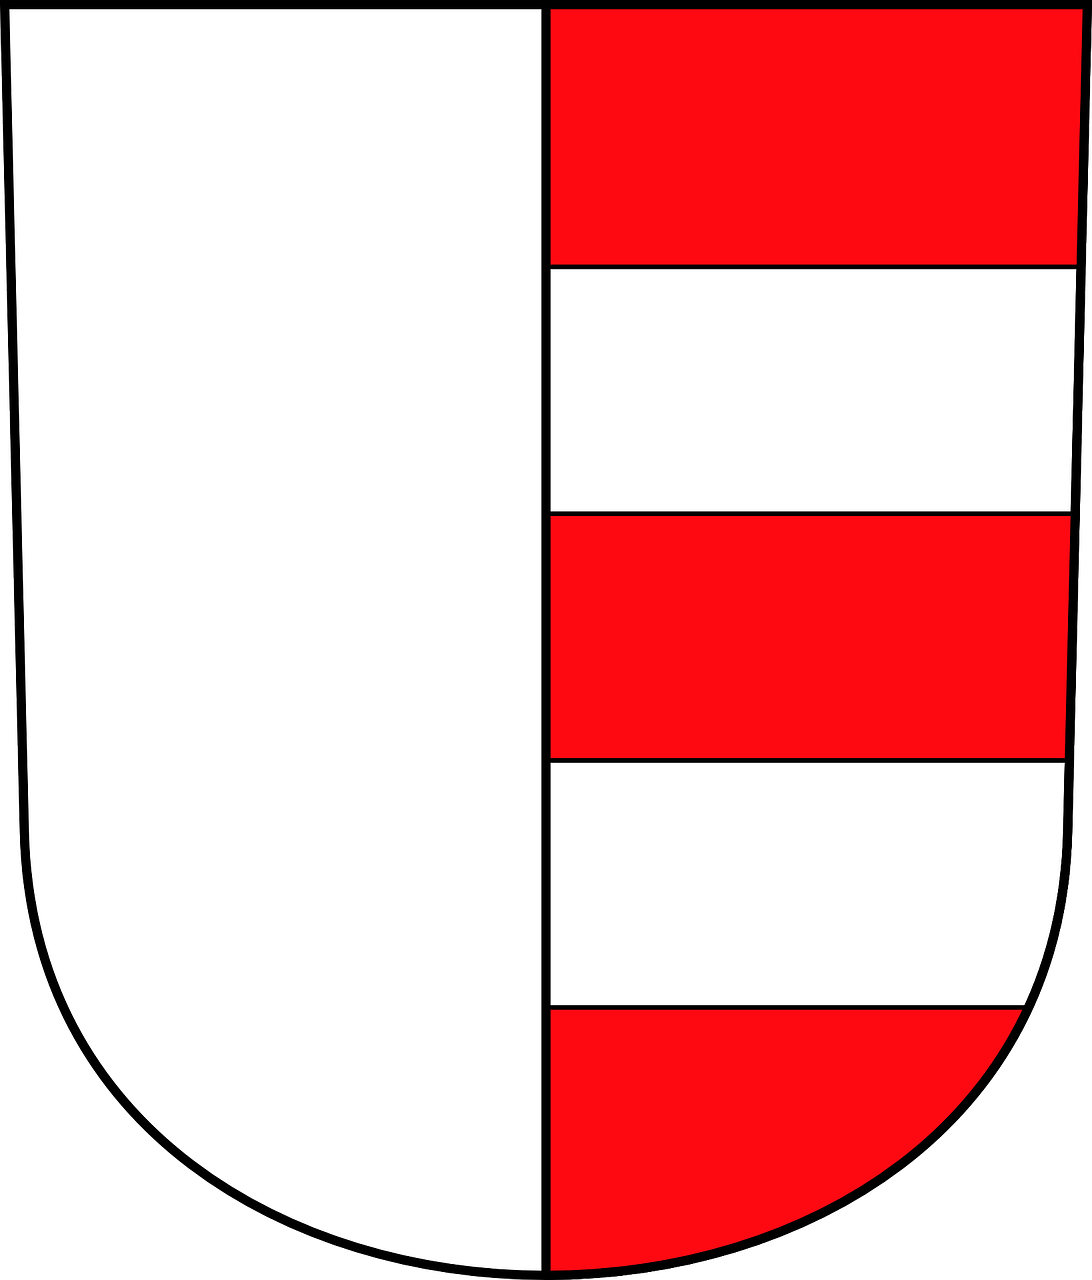 uster coat of arms city free photo